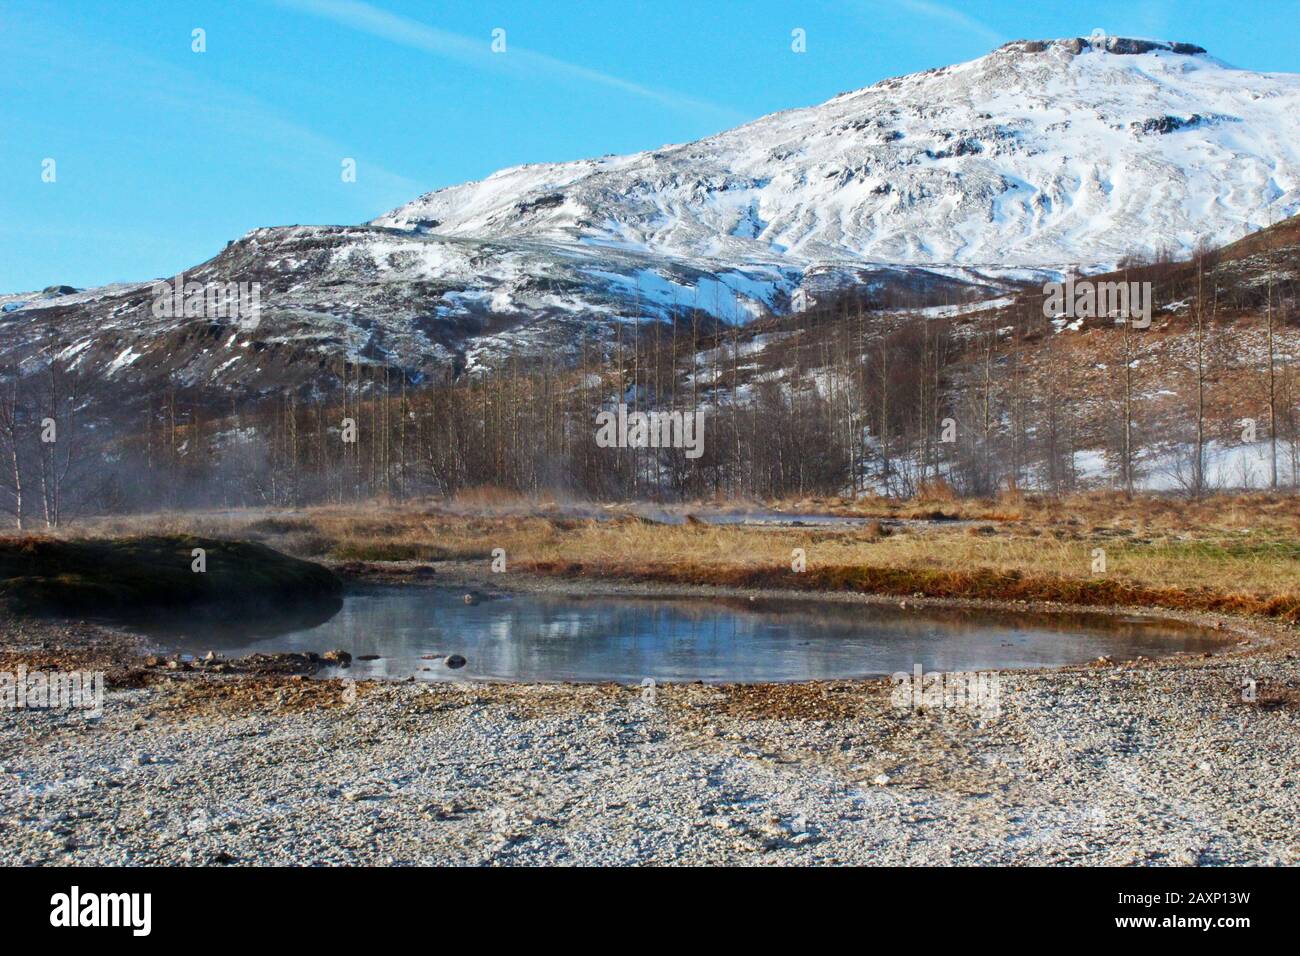 Stunning snowy mountain and hot spring in Geysir Park, Iceland on a bright day Stock Photo